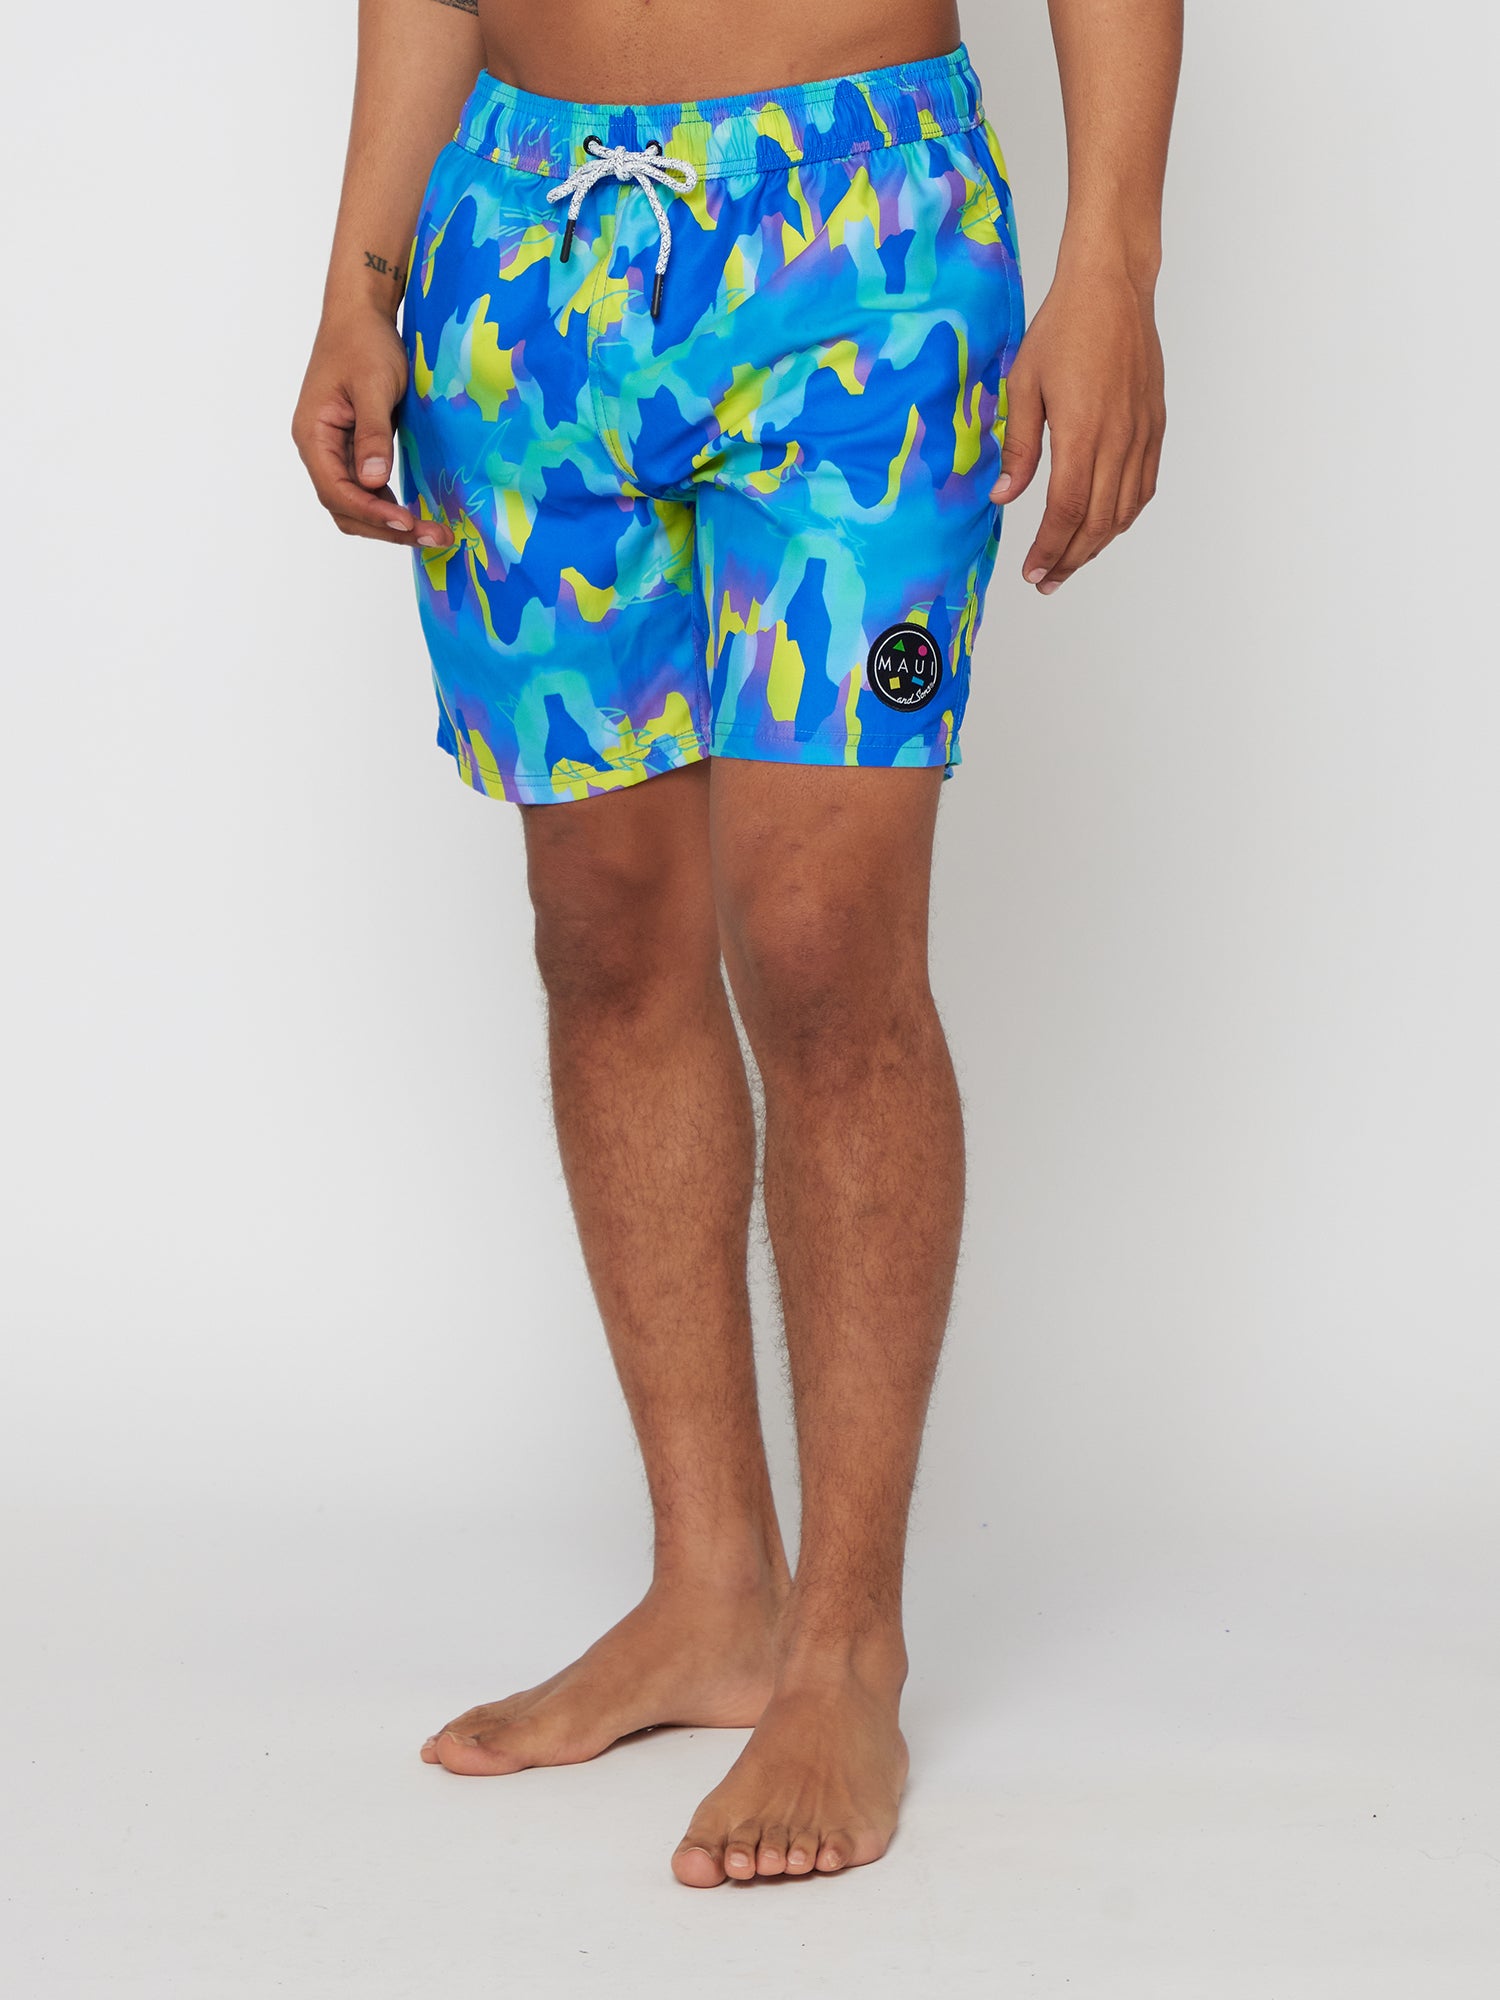 Volcanic Eruption Pool Shorts in Blue